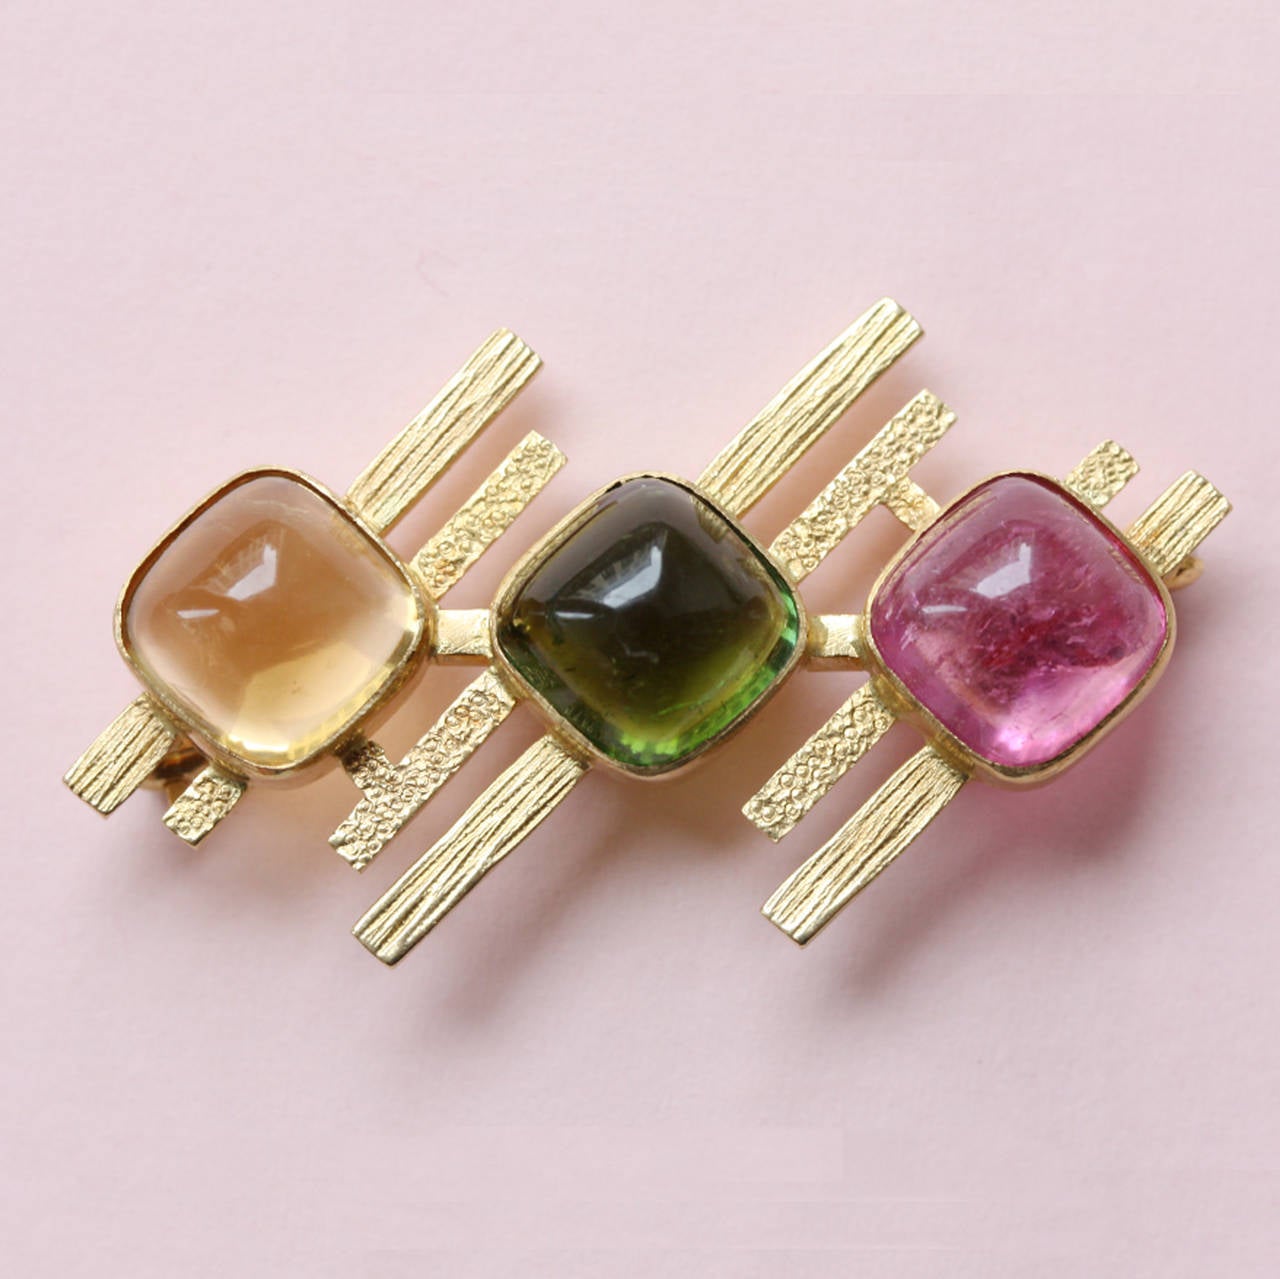 An 18 carat gold geometrical brooch set with a pink and green tourmaline and a citrine all in sugarloaf cut, signed: MK(J)LTD. Chester. circa 1968-1977.

weight: 11.3 gram
dimensions: 4.6 x 2. cm.